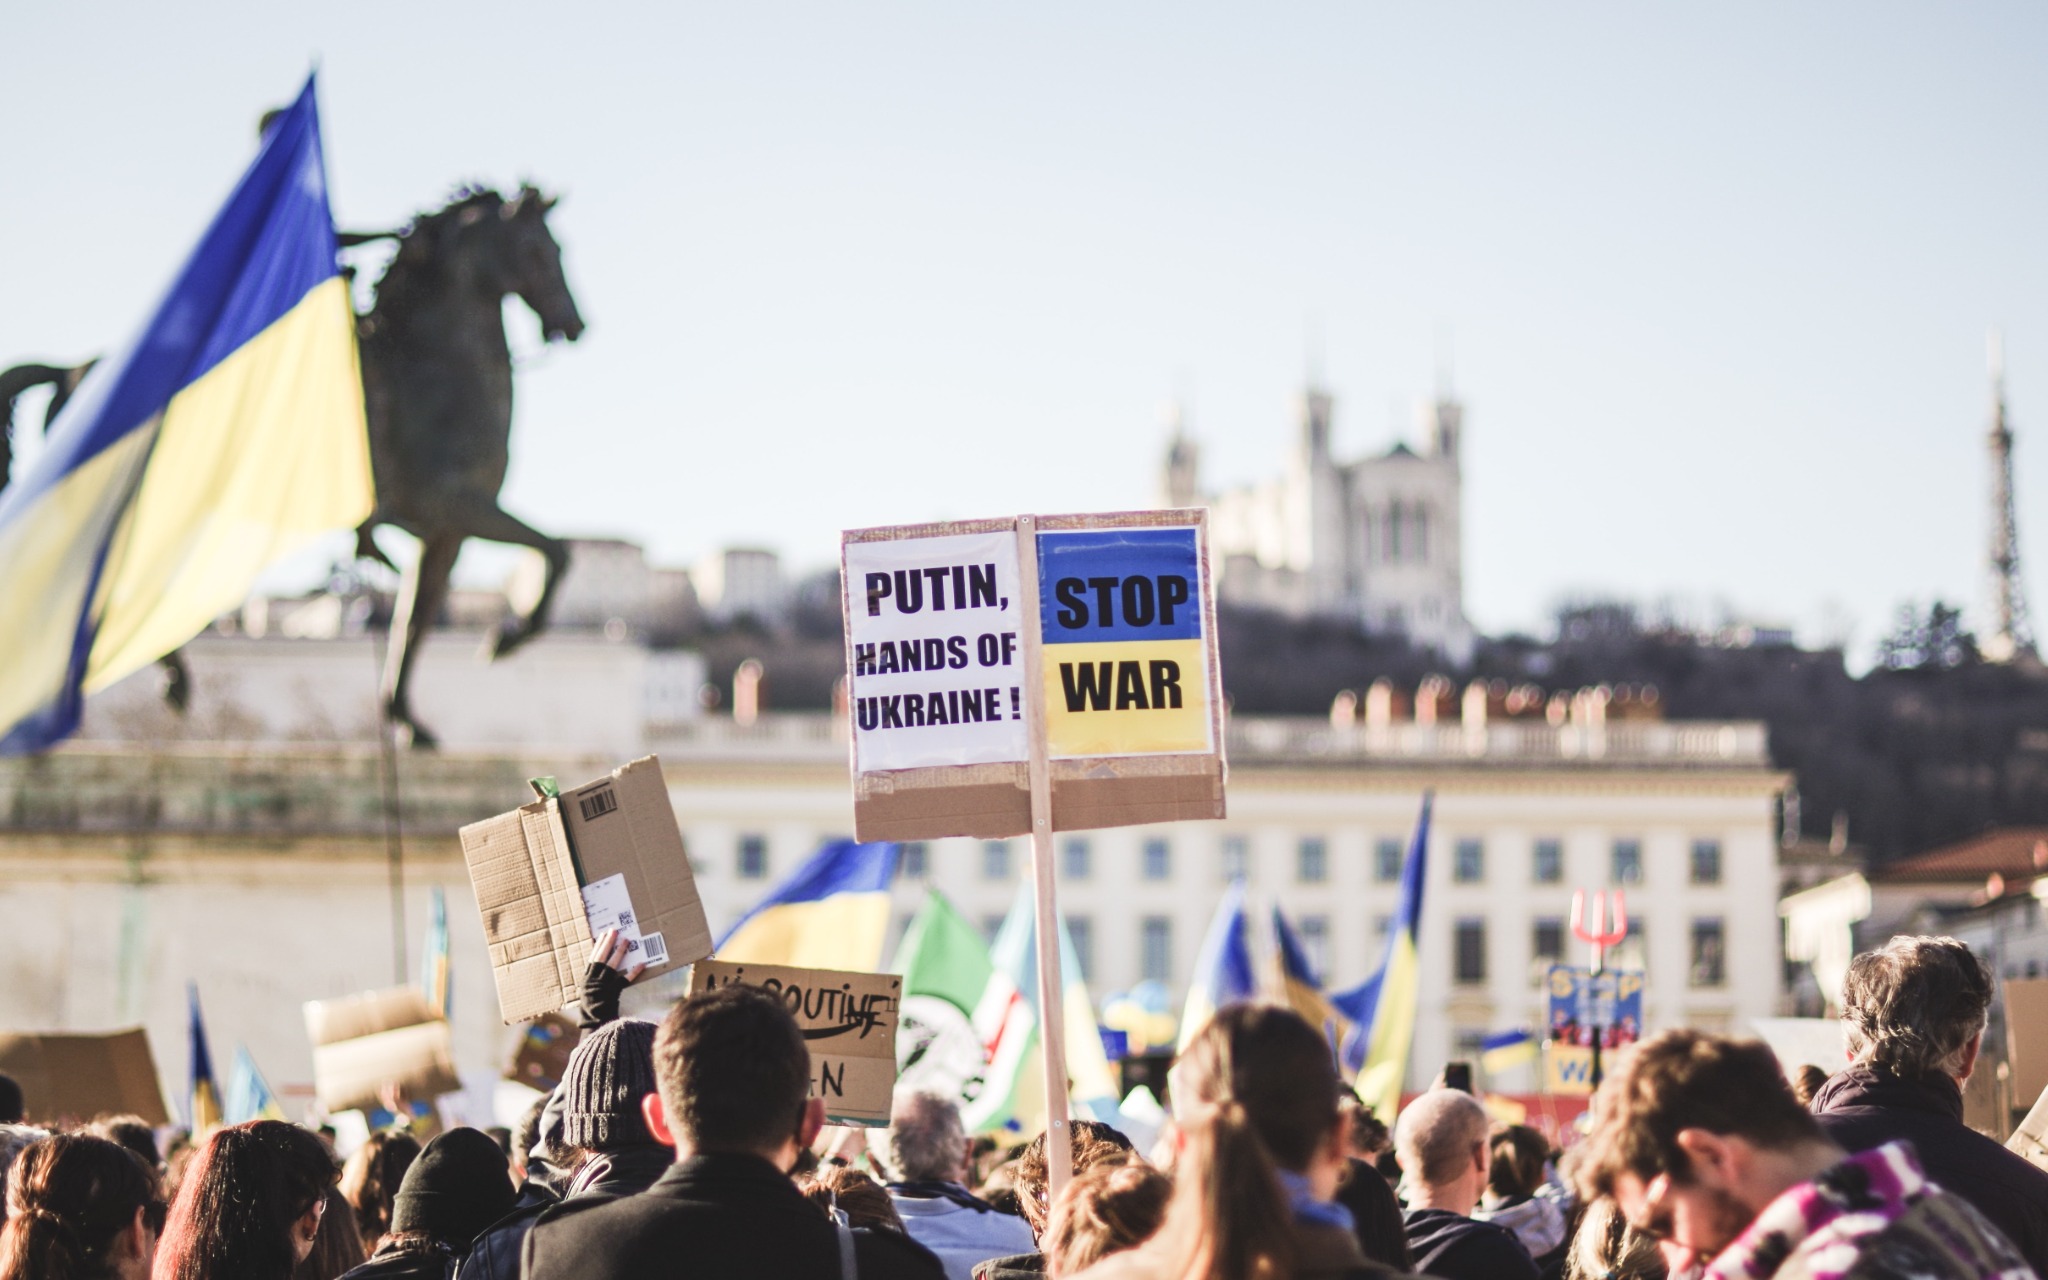 Protests in Lyon against the war in Ukraine — Februrary 27th, 2022 (Credit: ev on Unsplash)